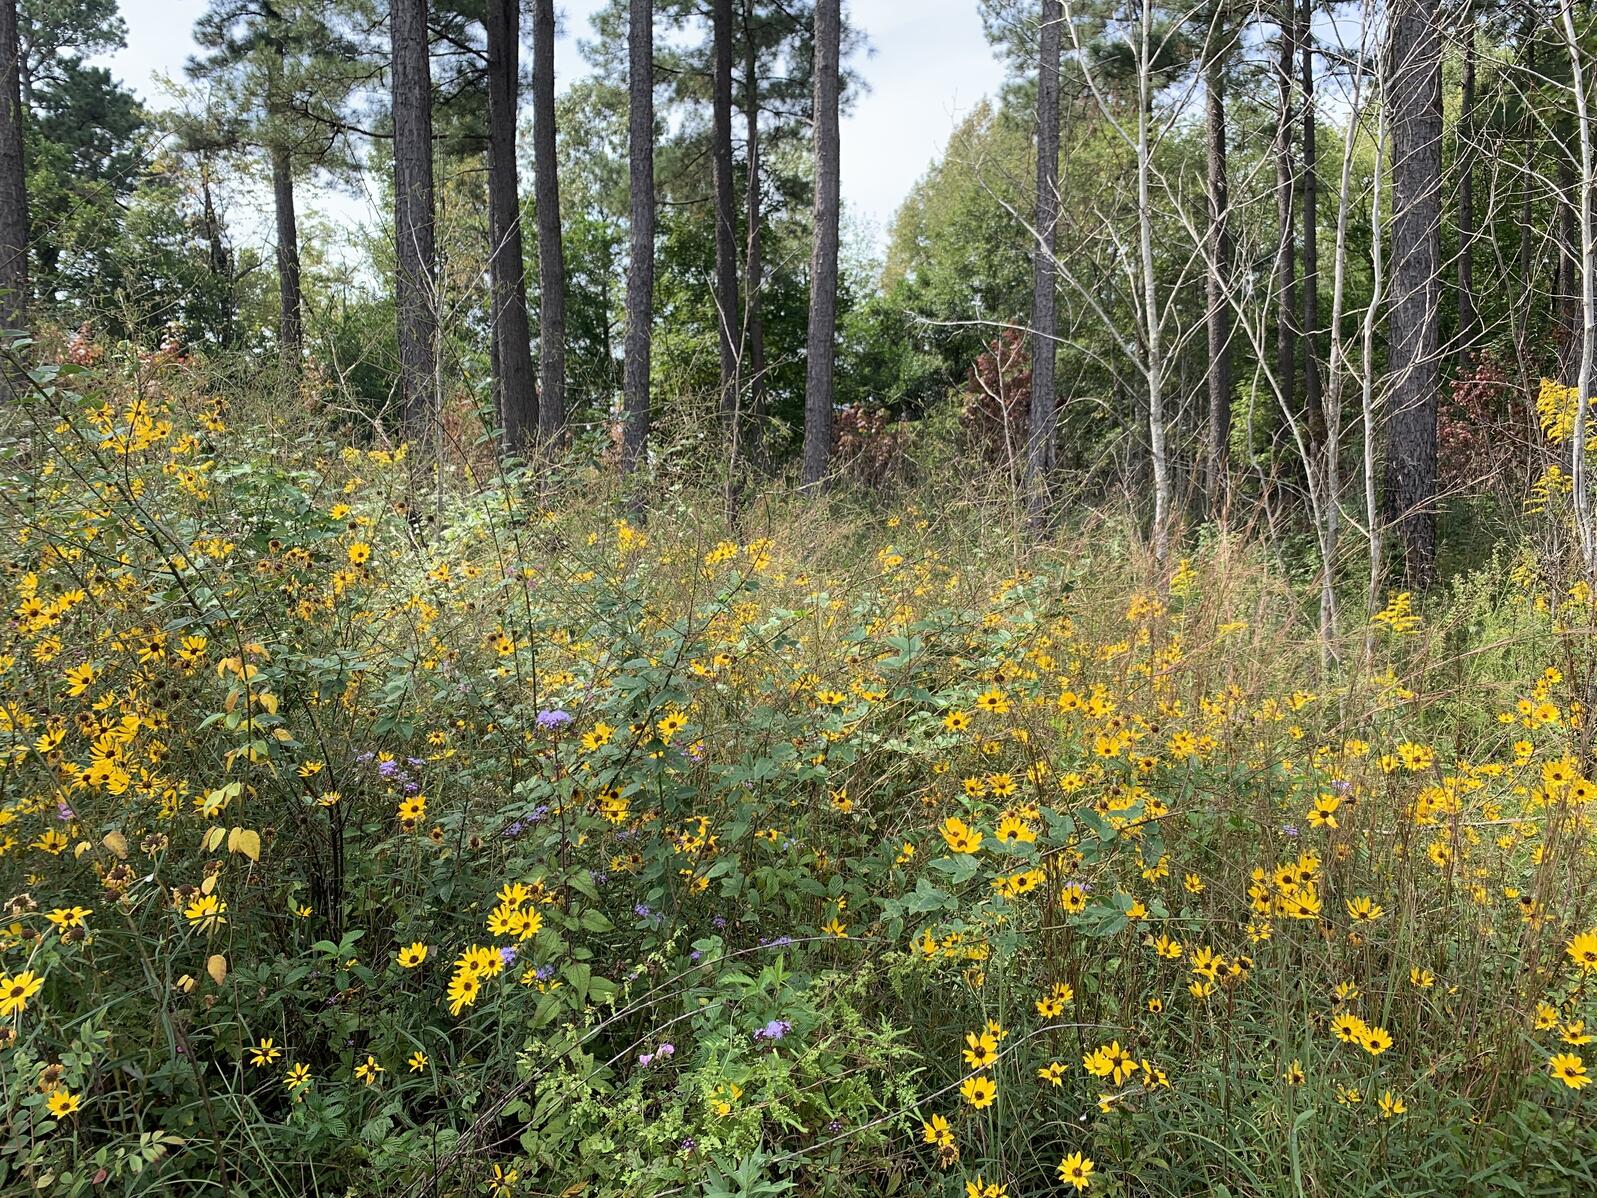 A beautiful field full of yellow rudbeckia flowers and purple bee balm flowers, next to a pine forest edge. 